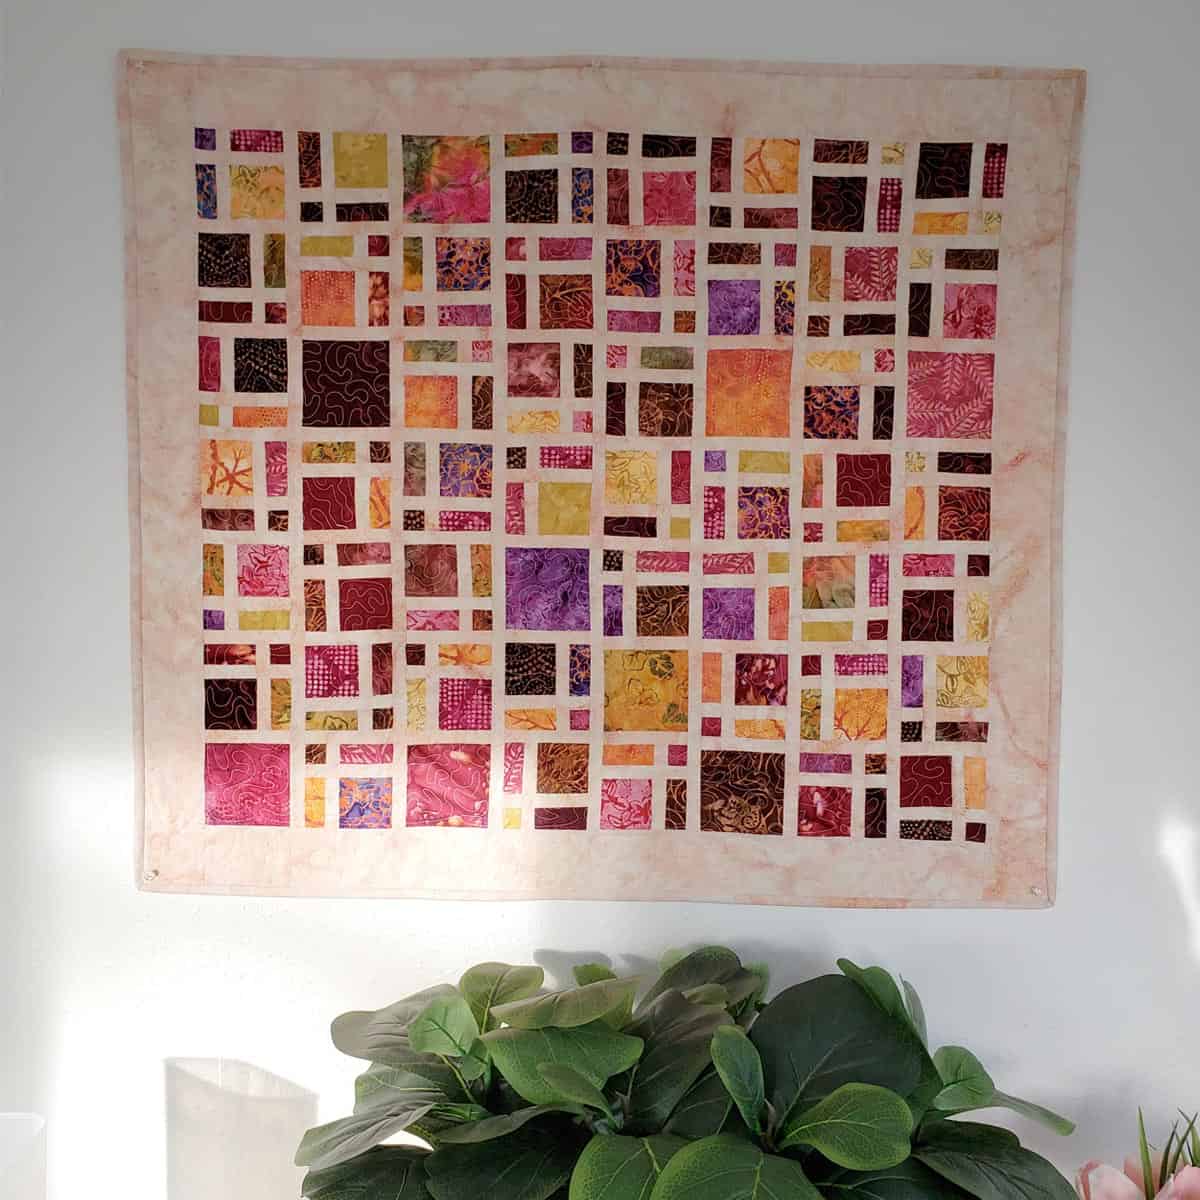 Mini Scattered quilt pattern